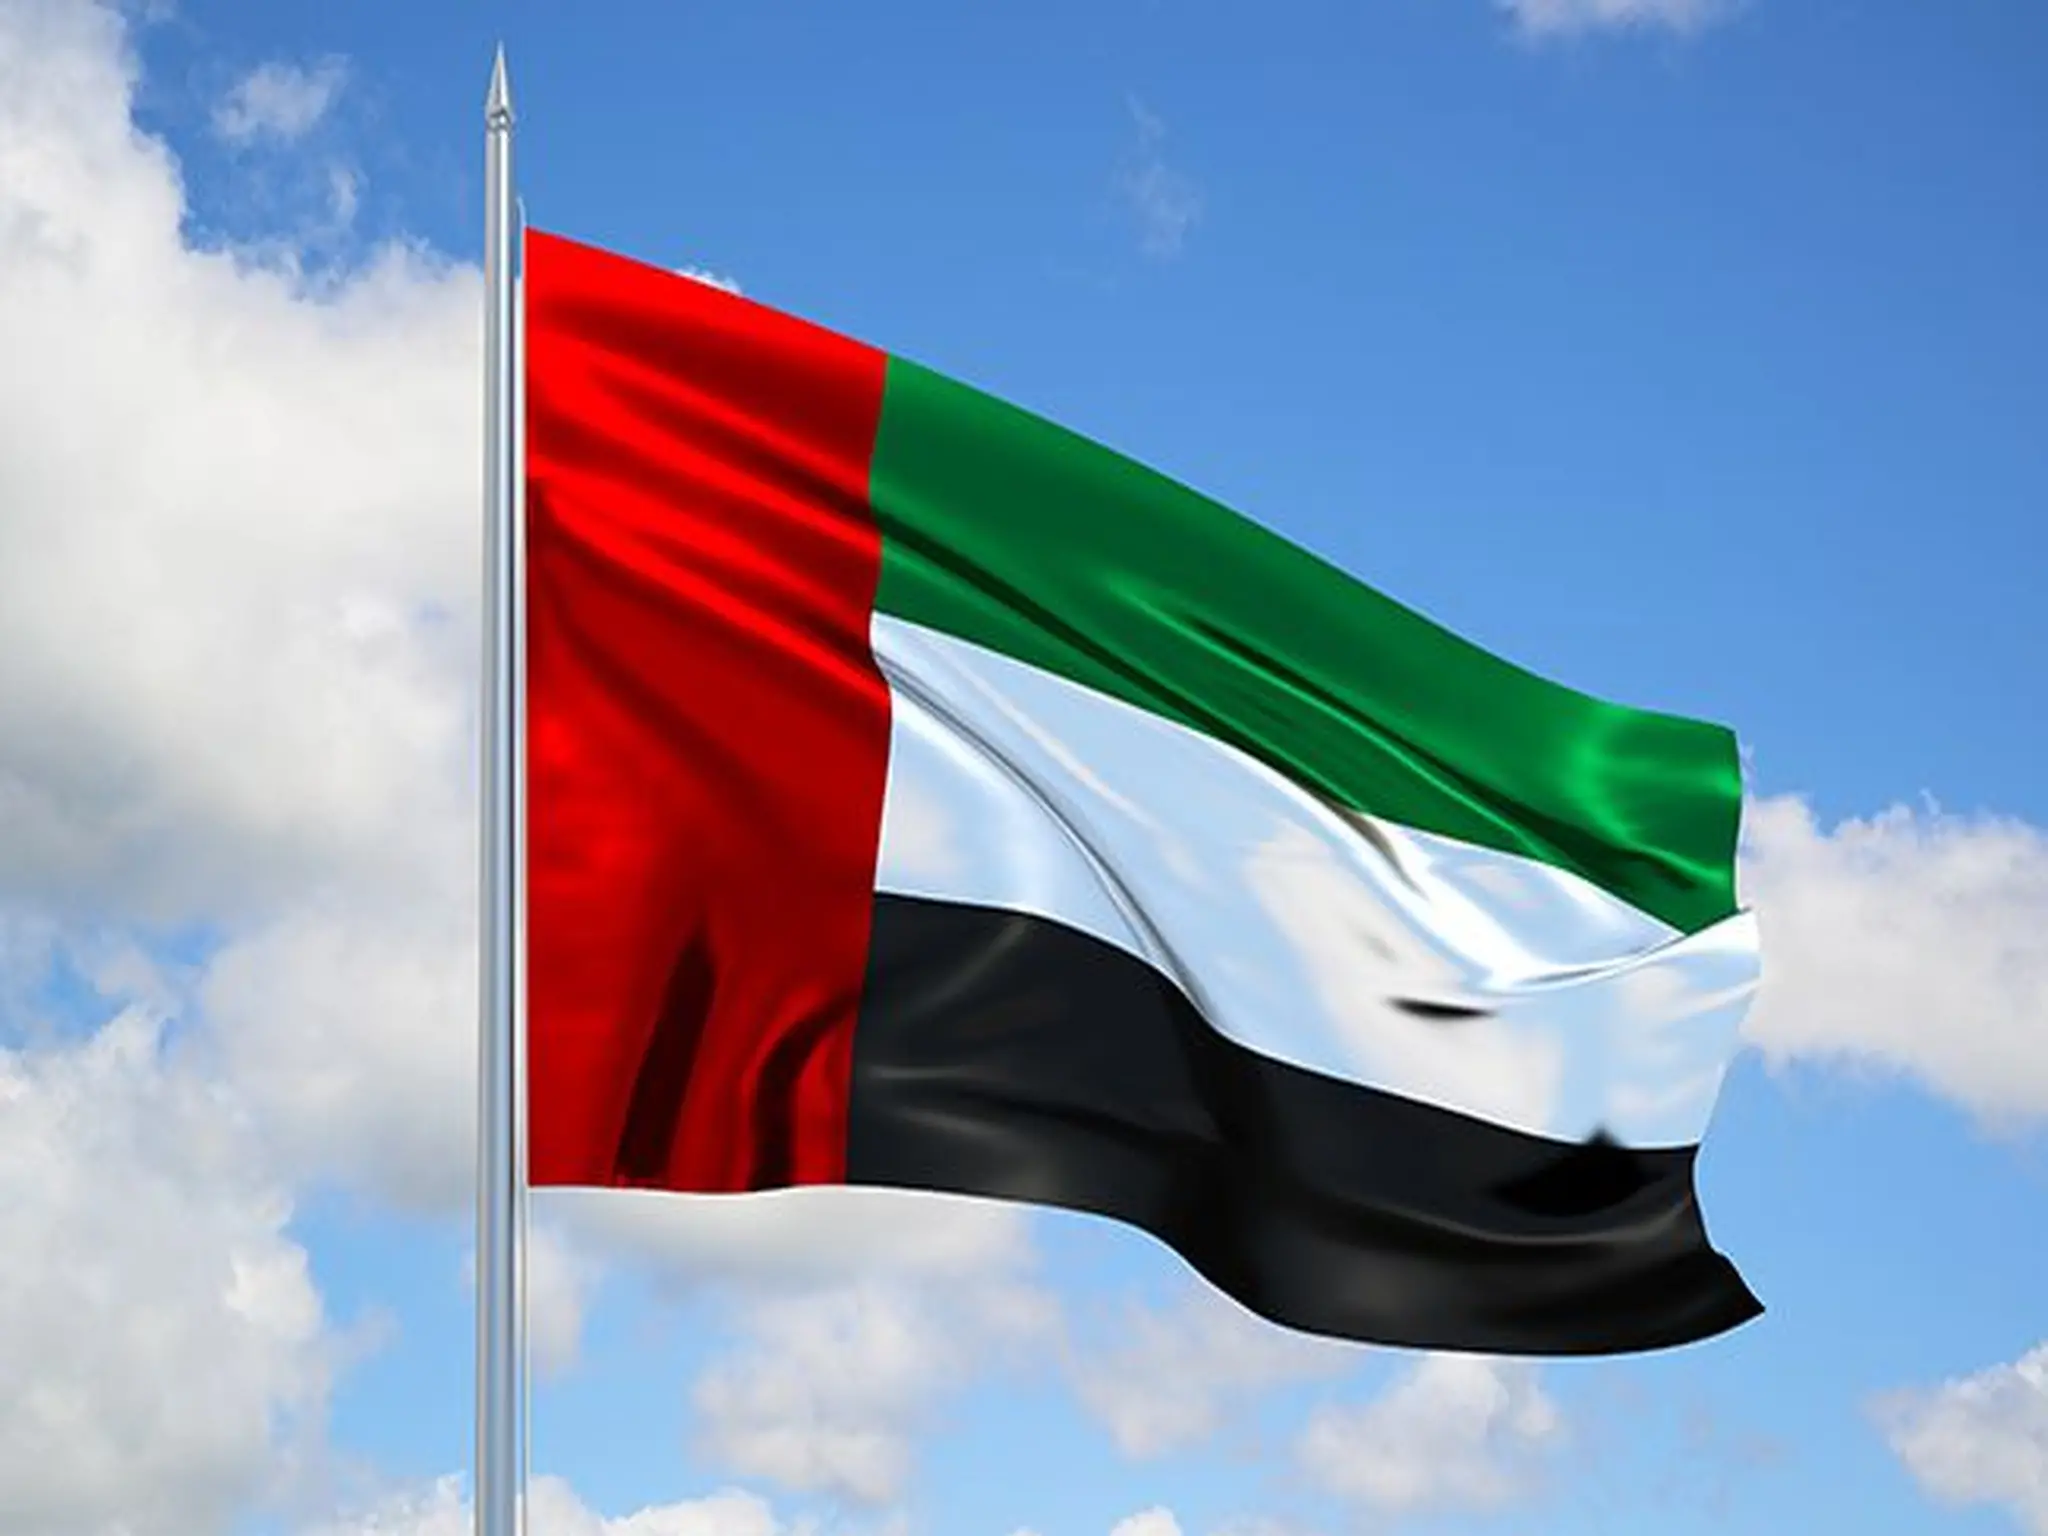 UAE: Important warning from today until Sunday